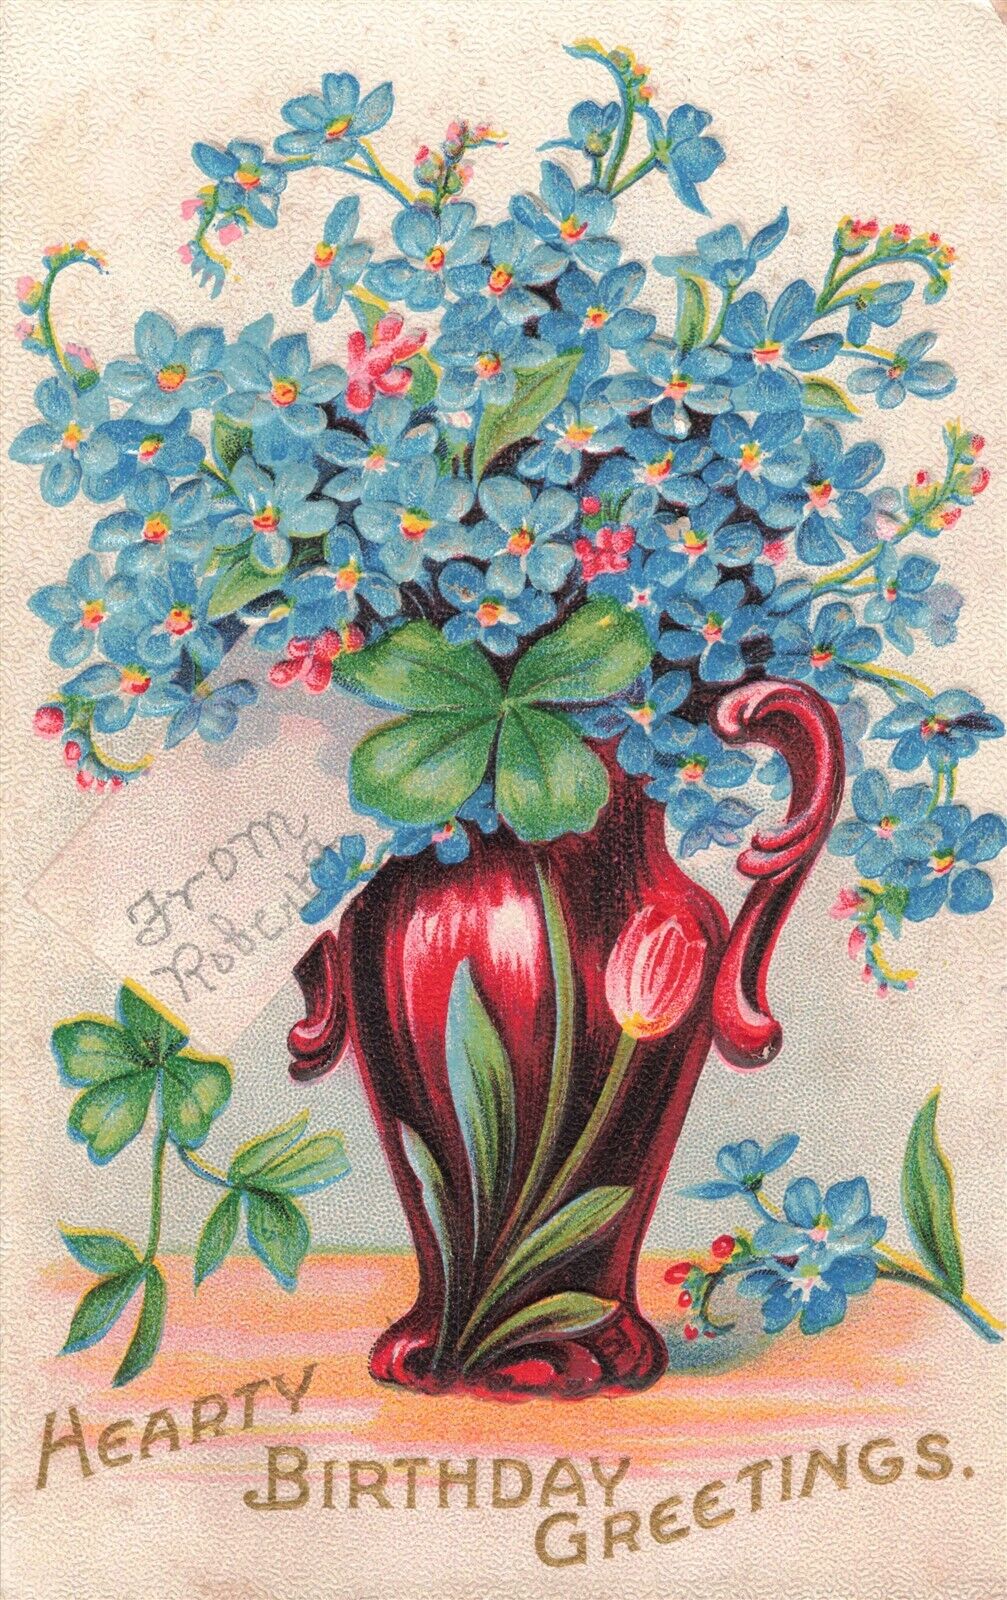 Hearty Birthday Greetings Embossed Floral Vase c1907 Postcard E77